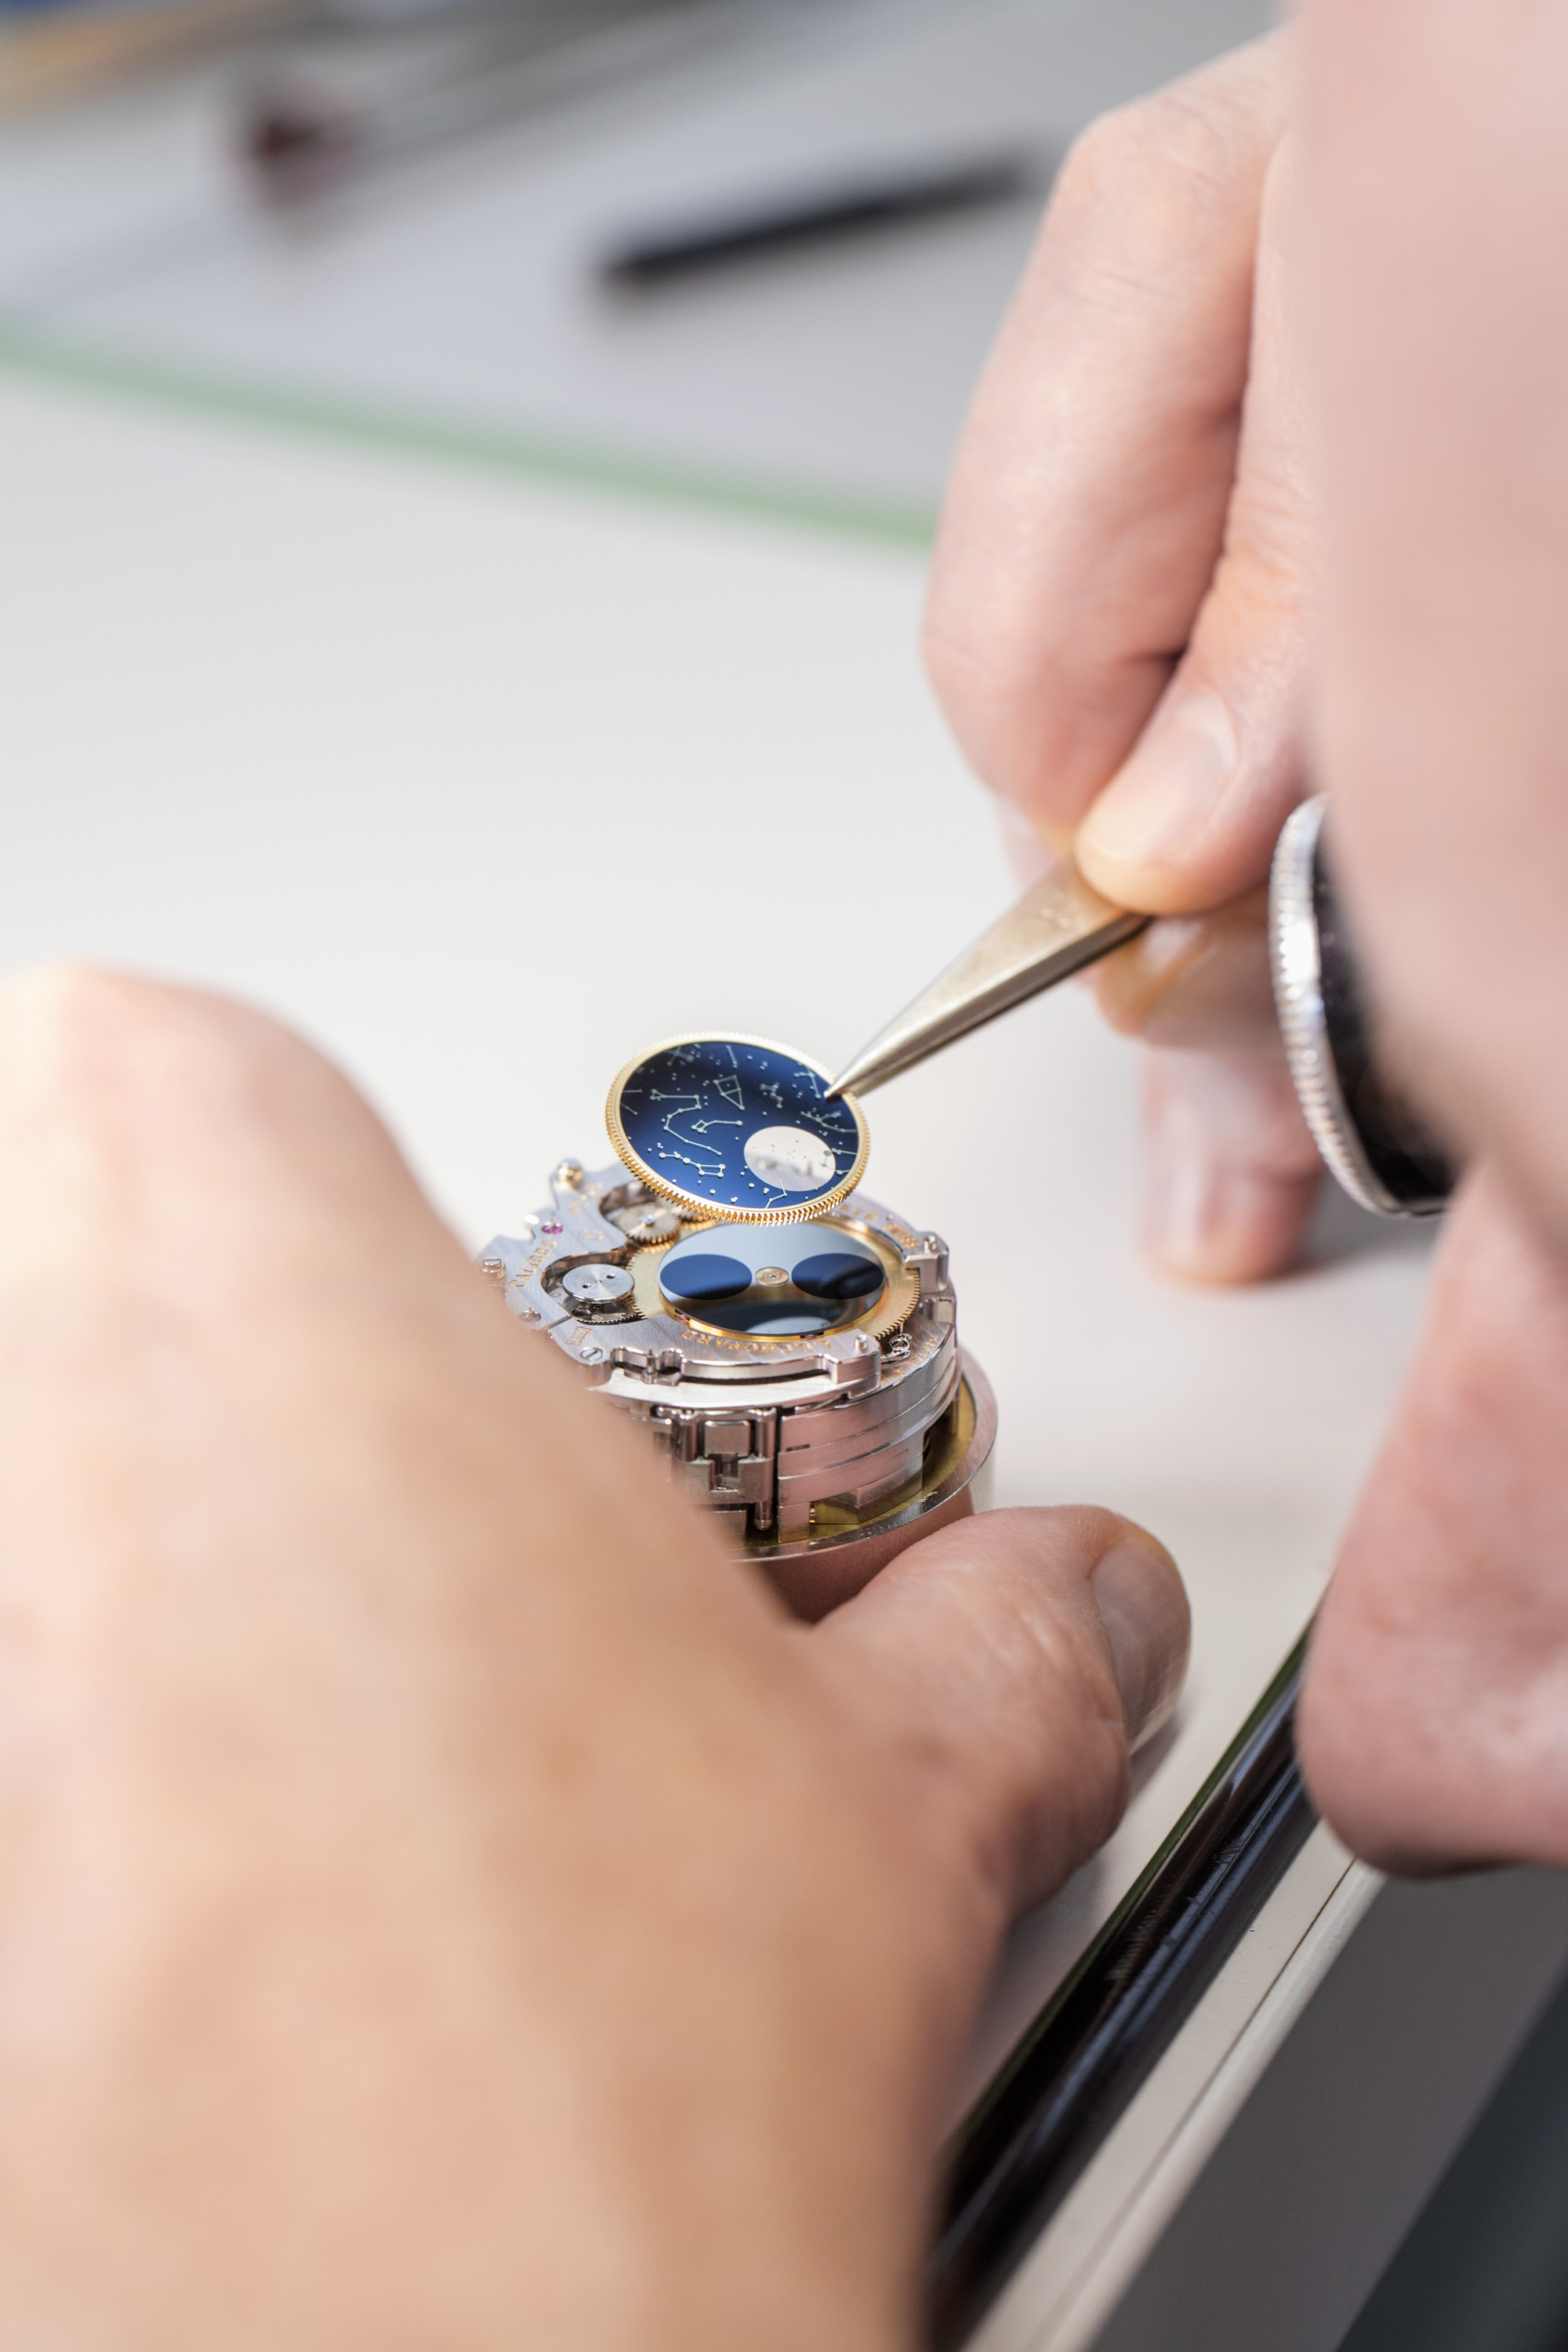 The master watchmaker at work on the set up of the moon phase superior disk